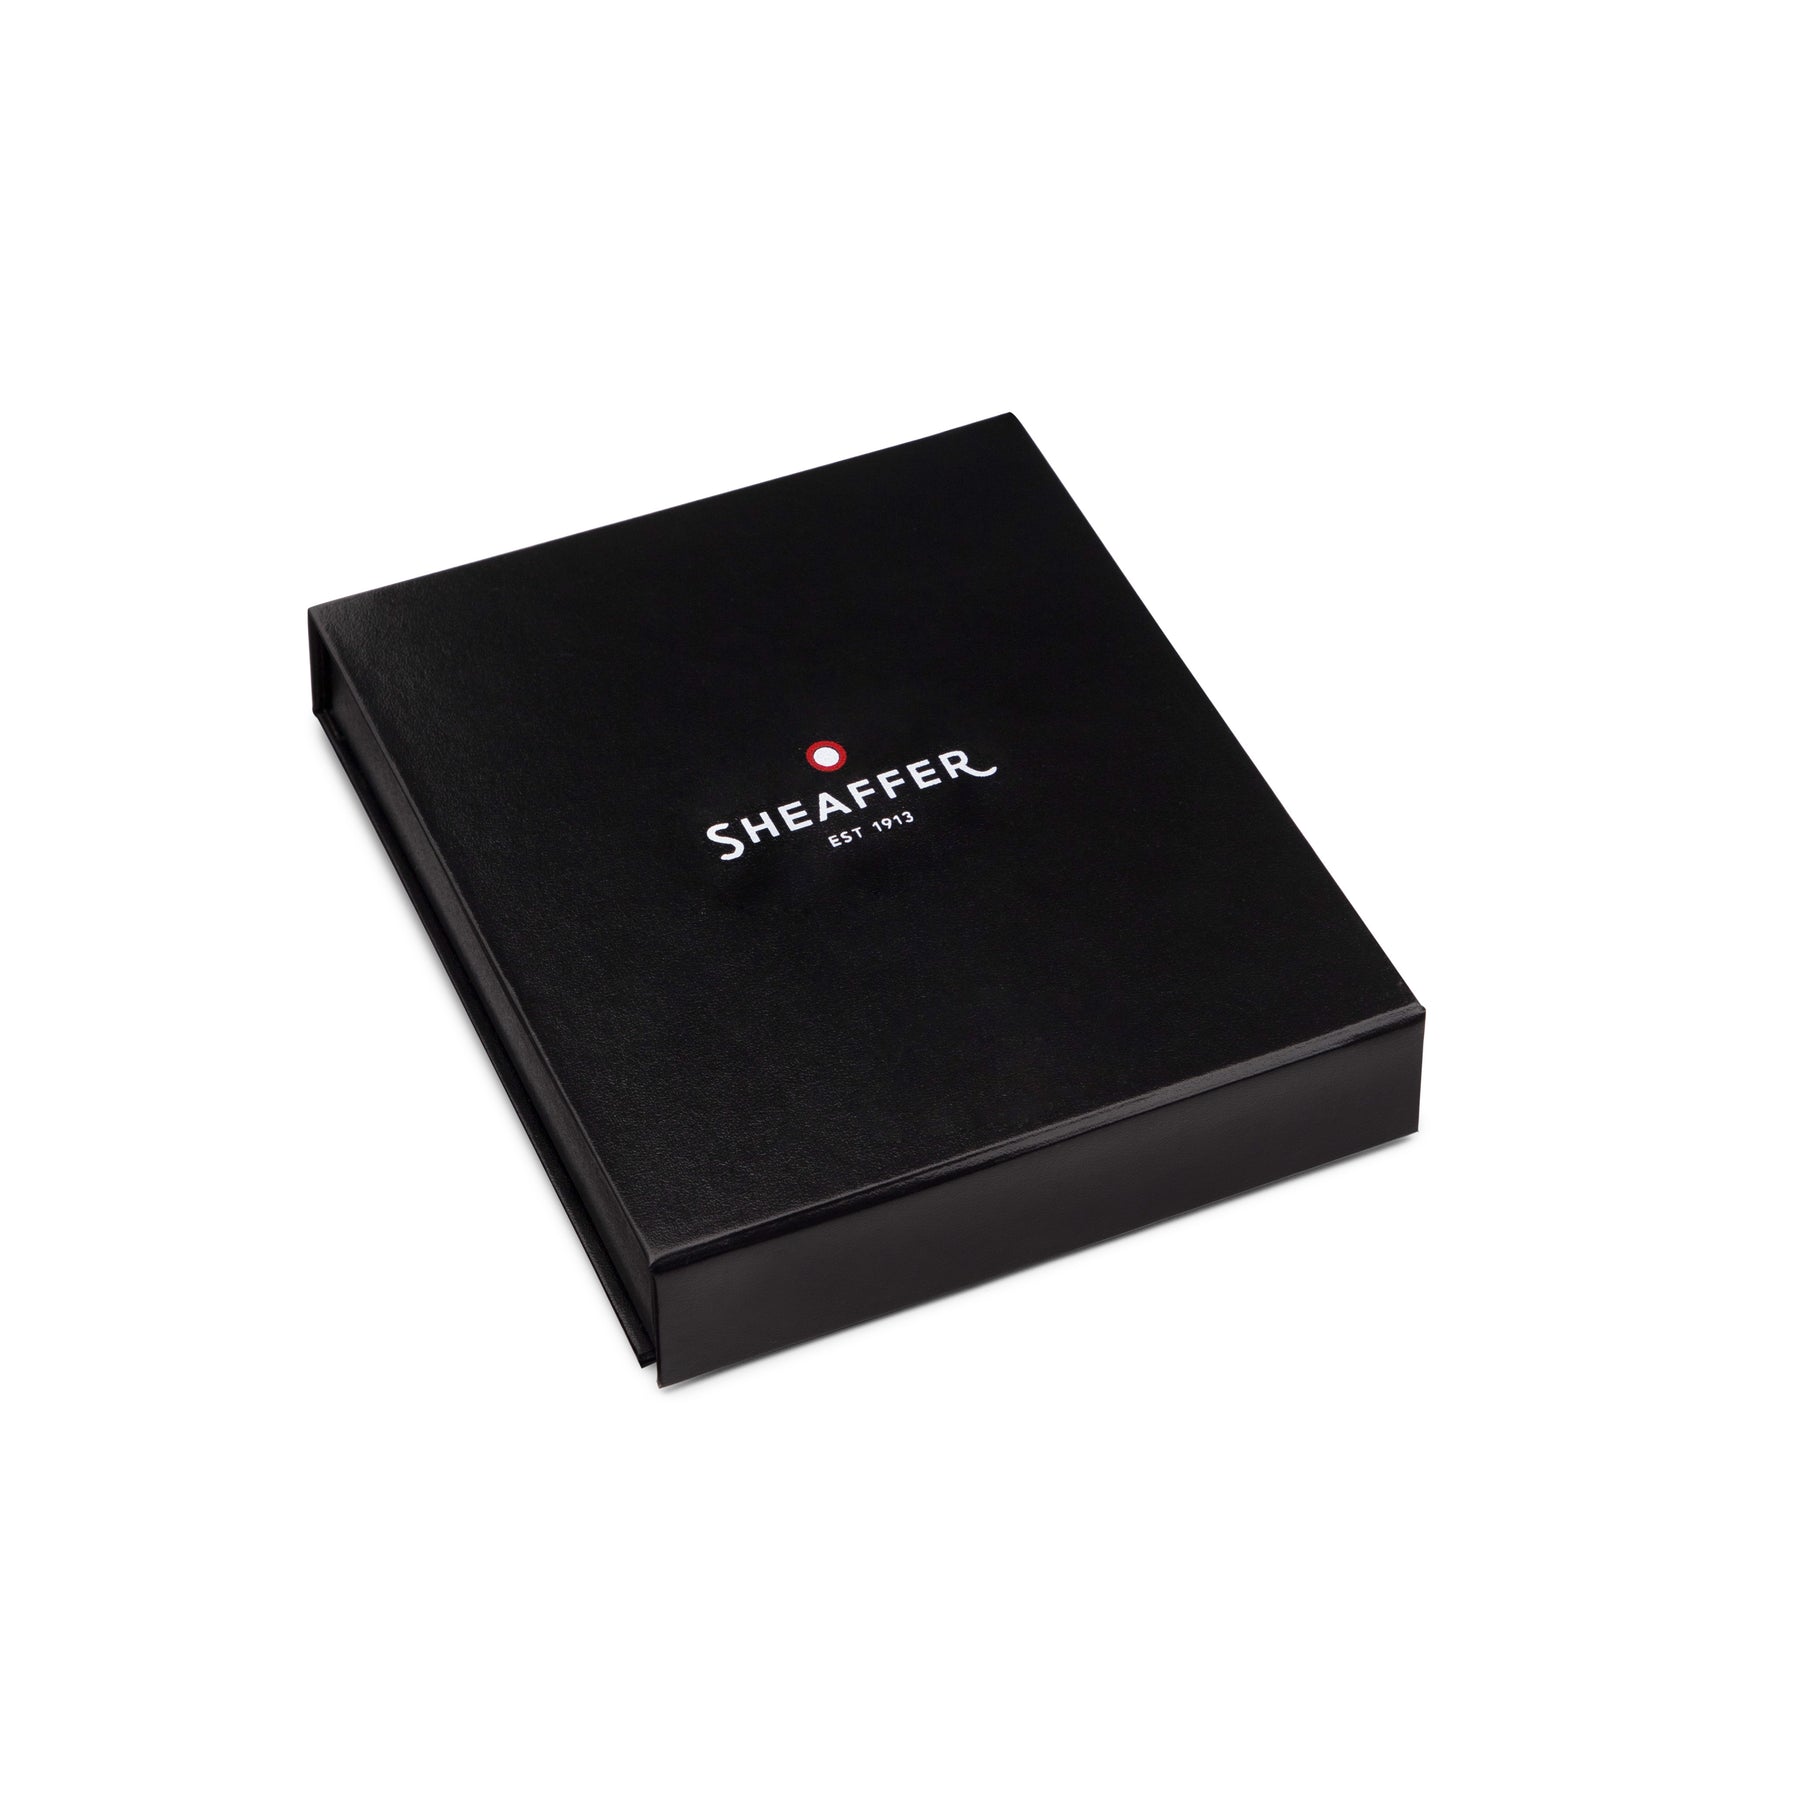 Sheaffer Gift Set ft. Glossy Black 100 Ballpoint Pen with Chrome Trims and Business Card Holder